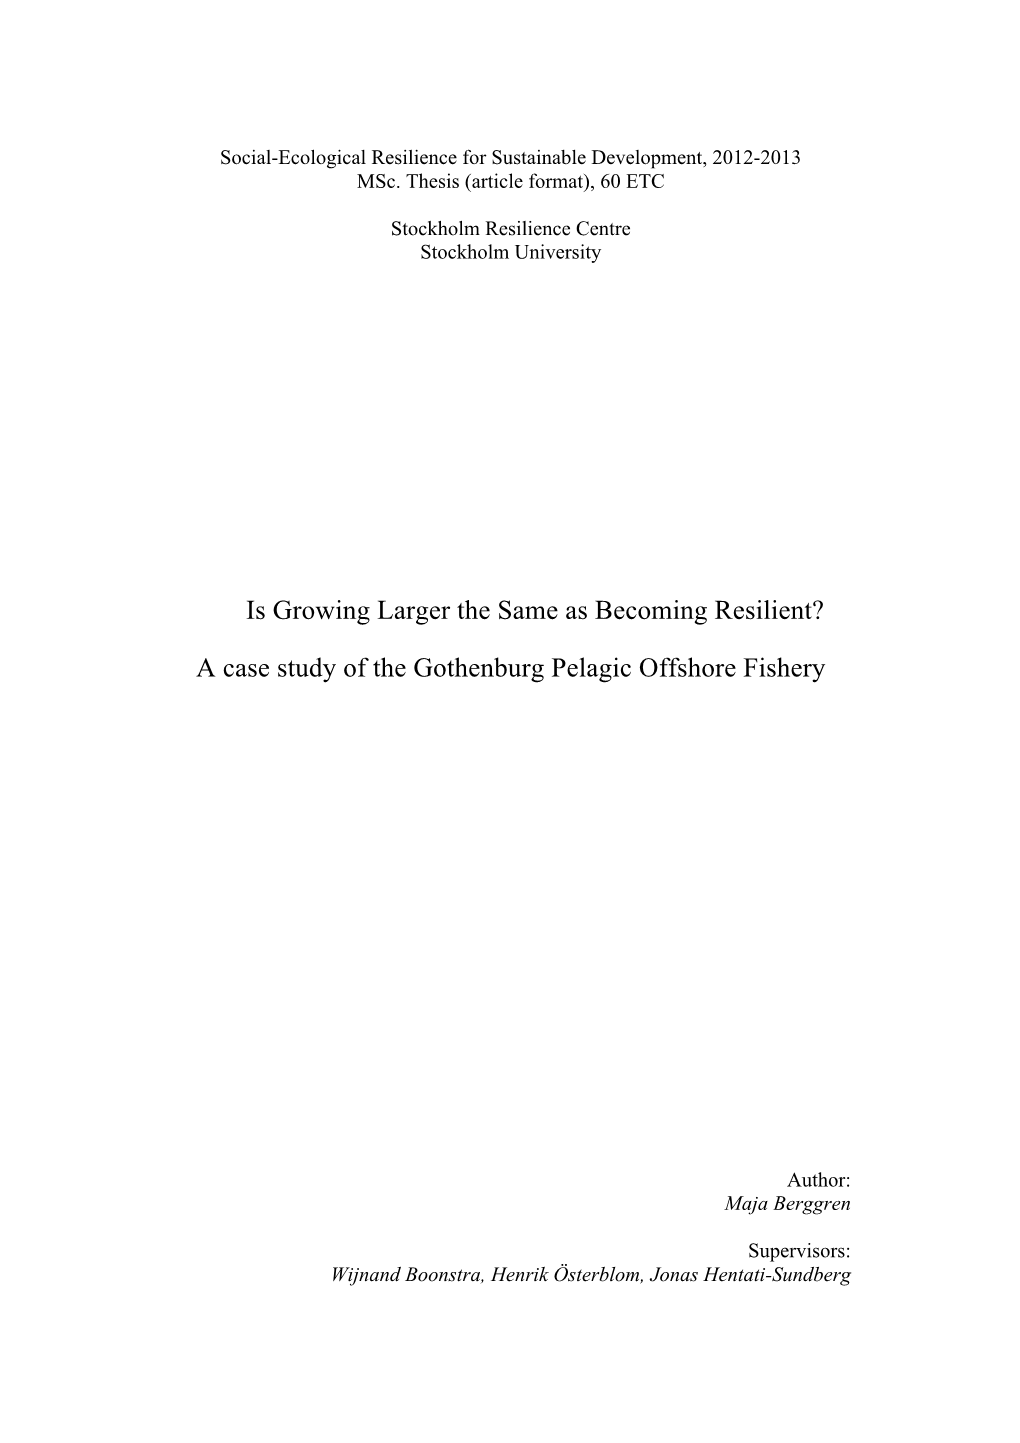 A Case Study of the Gothenburg Pelagic Offshore Fishery